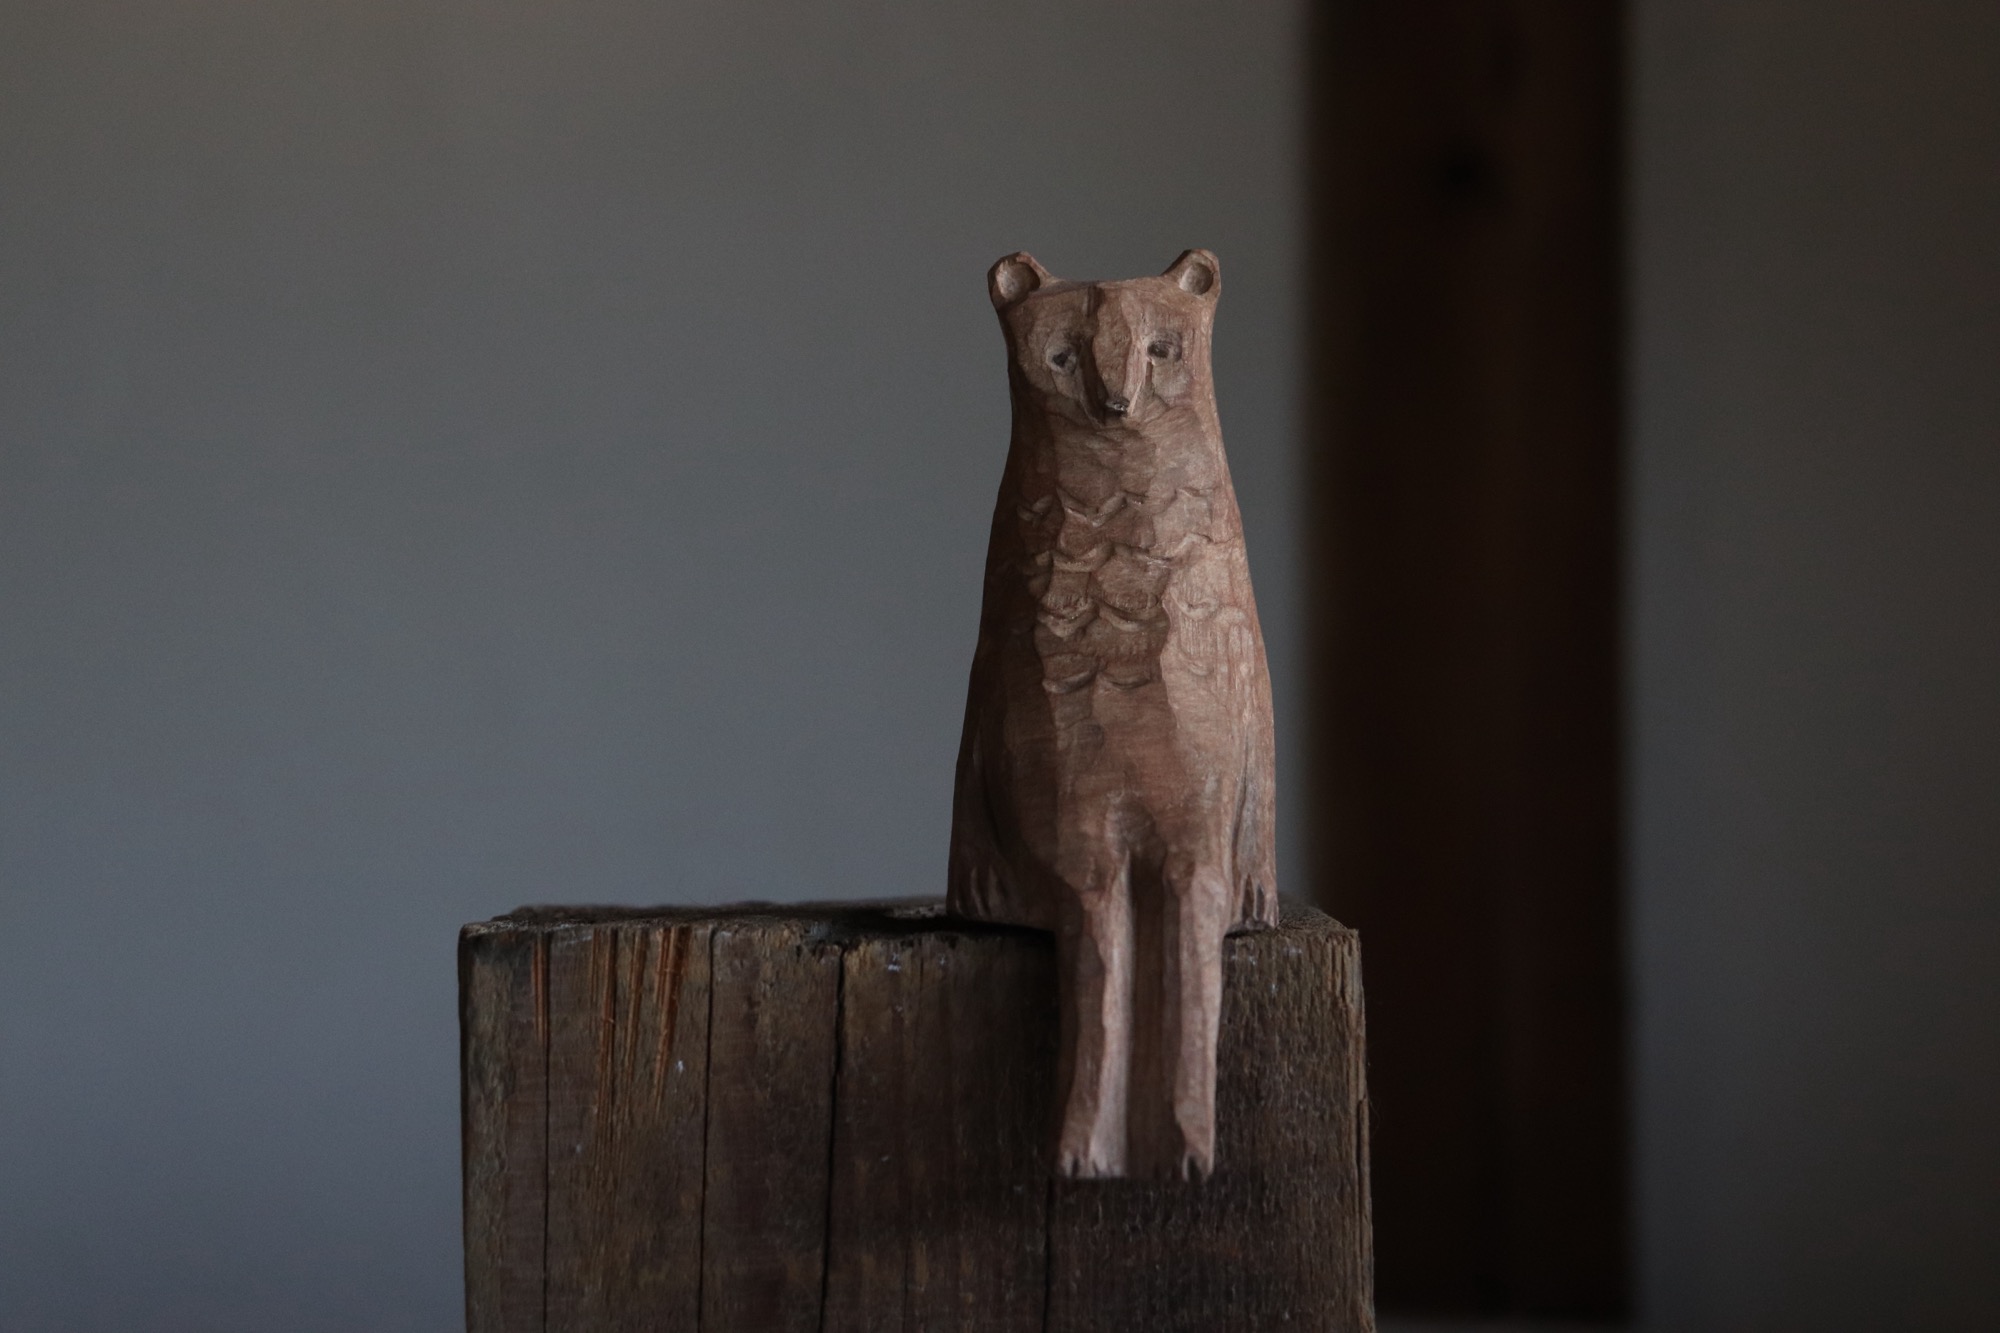 a wooden sculpture of a bear-like creature sitting on another piece of unworked timber